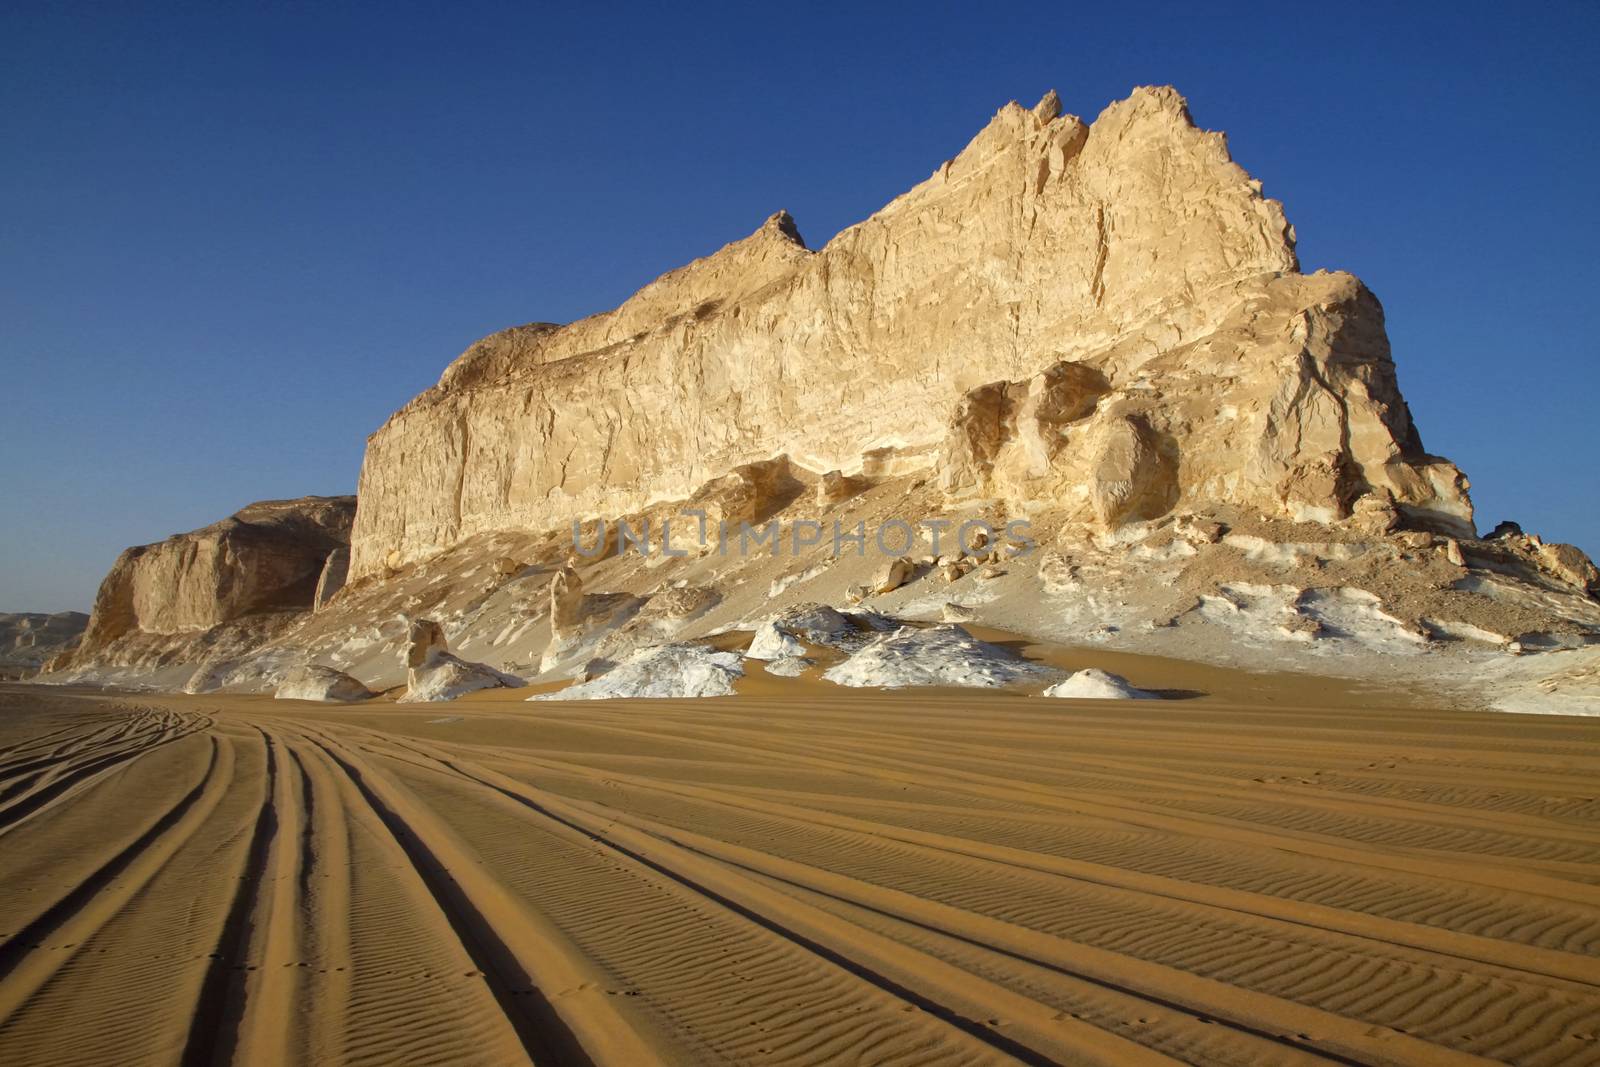  the Rock formations at the Western White Desert National Park of Egypt